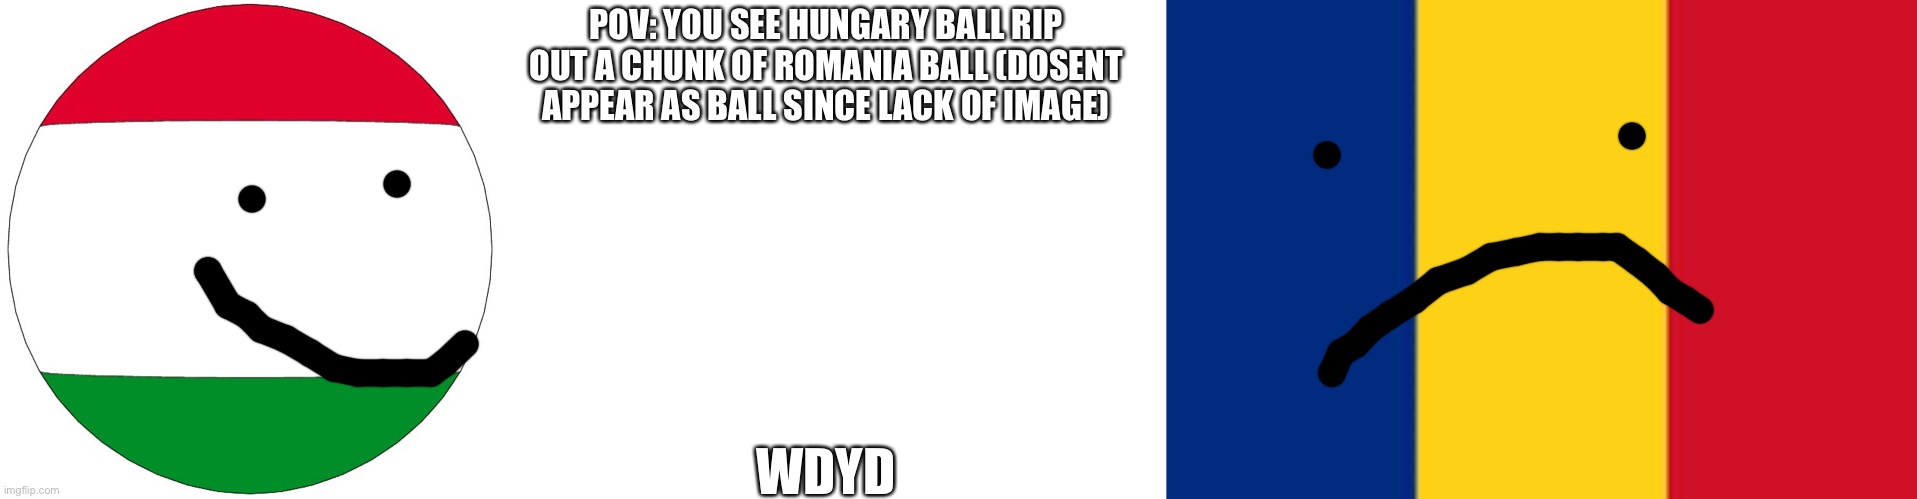 Hungary and Romania countryball rp! | POV: YOU SEE HUNGARY BALL RIP OUT A CHUNK OF ROMANIA BALL (DOSENT APPEAR AS BALL SINCE LACK OF IMAGE); WDYD | image tagged in hungary ball,romania | made w/ Imgflip meme maker